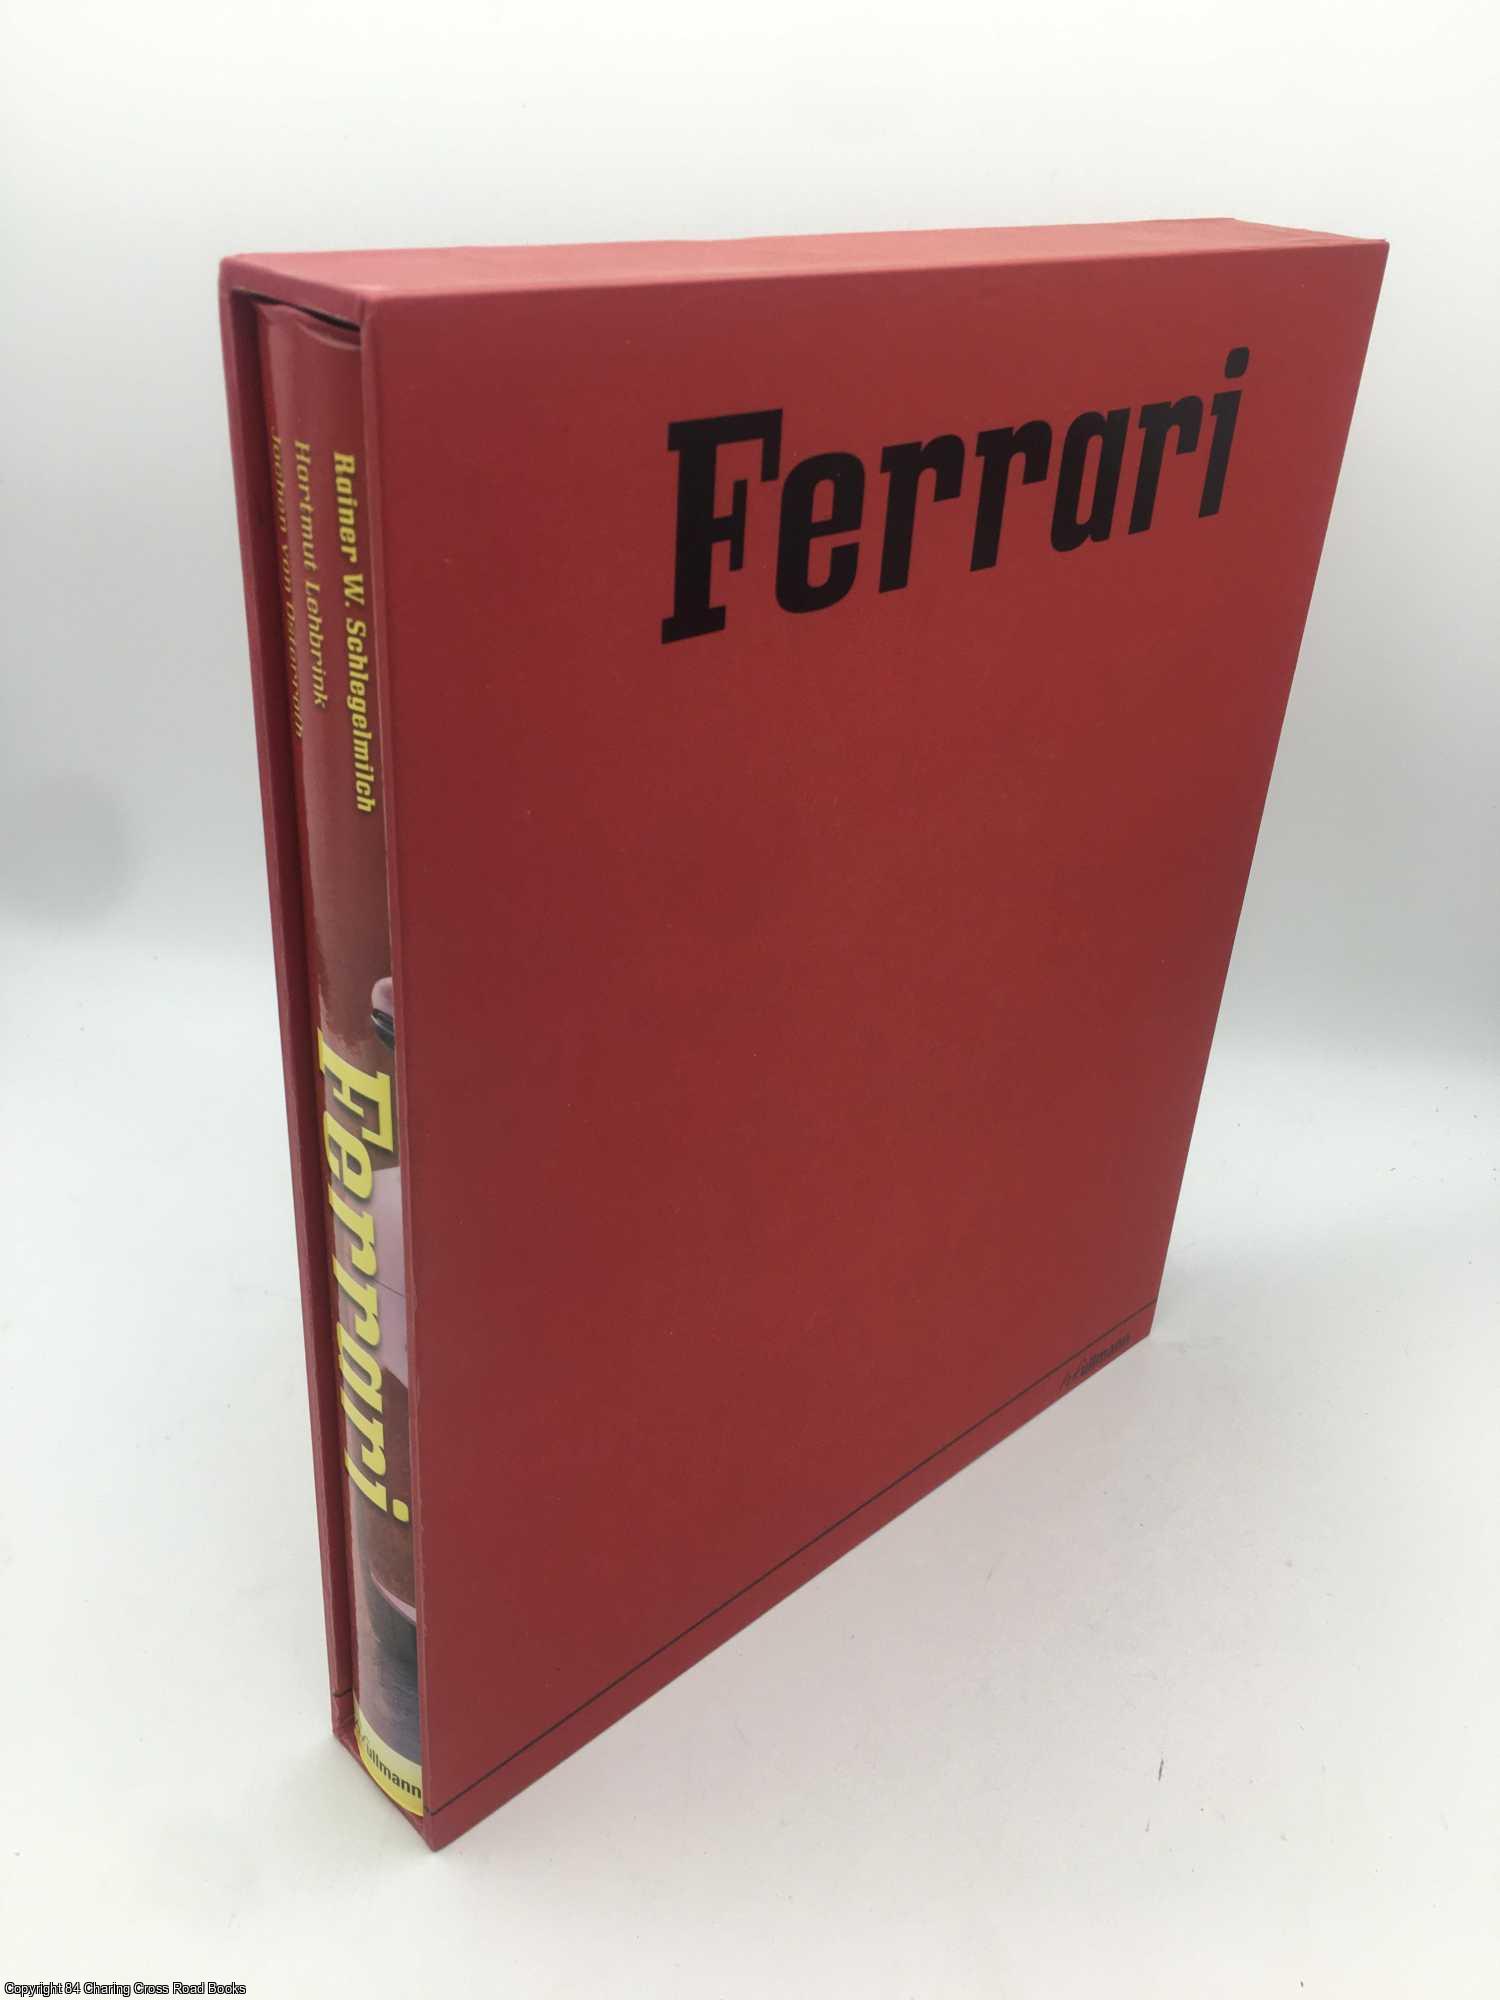 Ferrari Updated Special Edition, slipcased by Hartmut Lehbrink, Rainer W.  Schlegelmilch on 84 Charing Cross Rare Books